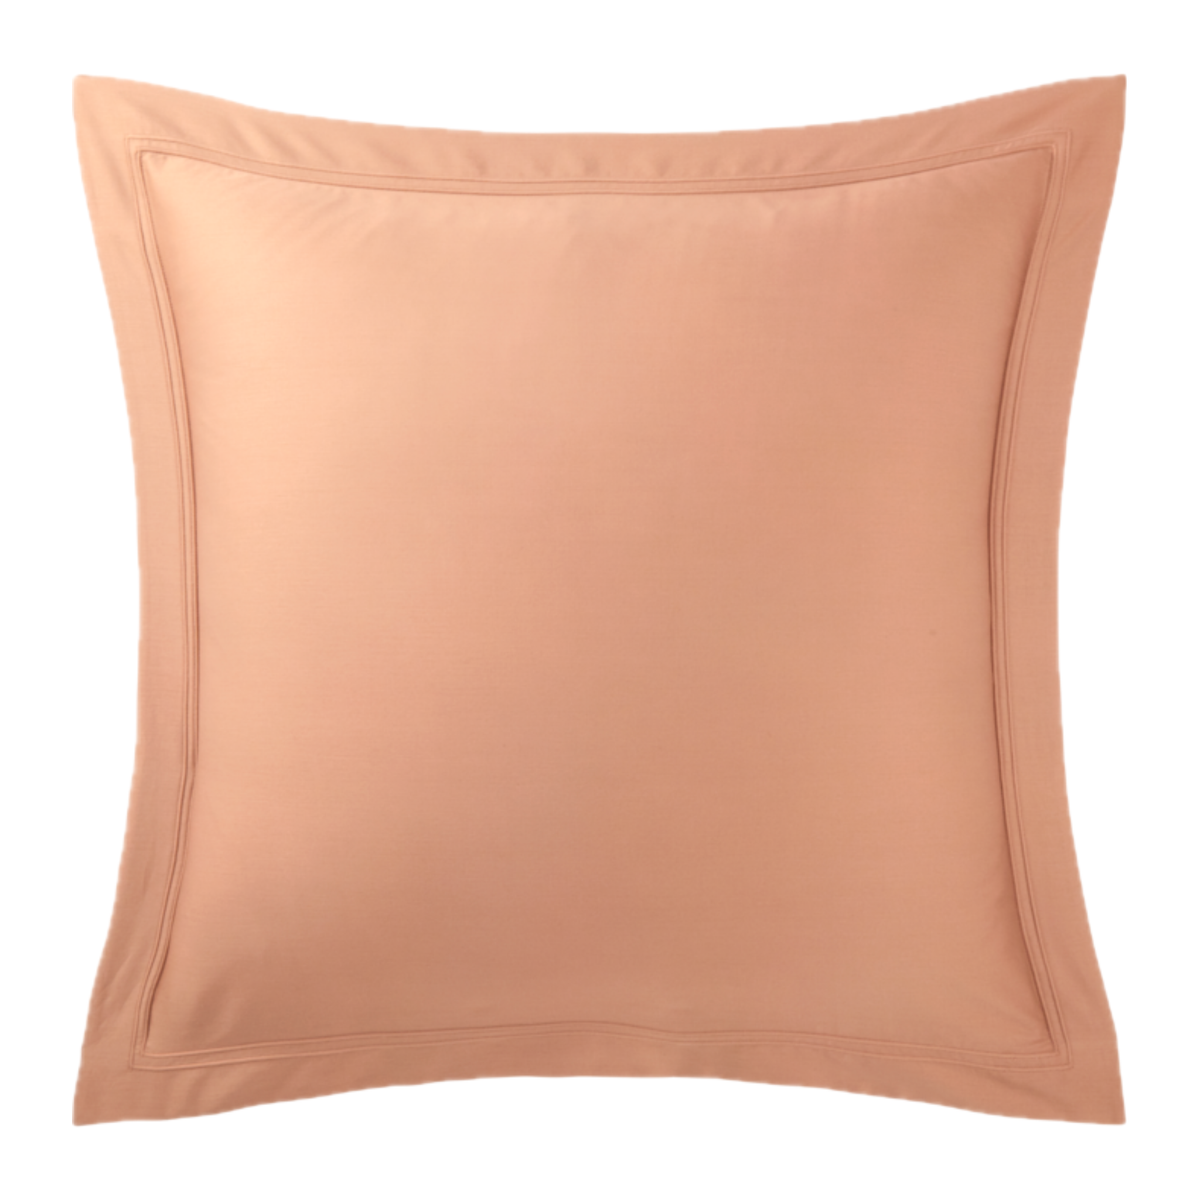 Euro Sham of Yves Delorme Triomphe Bedding in Sienna Color